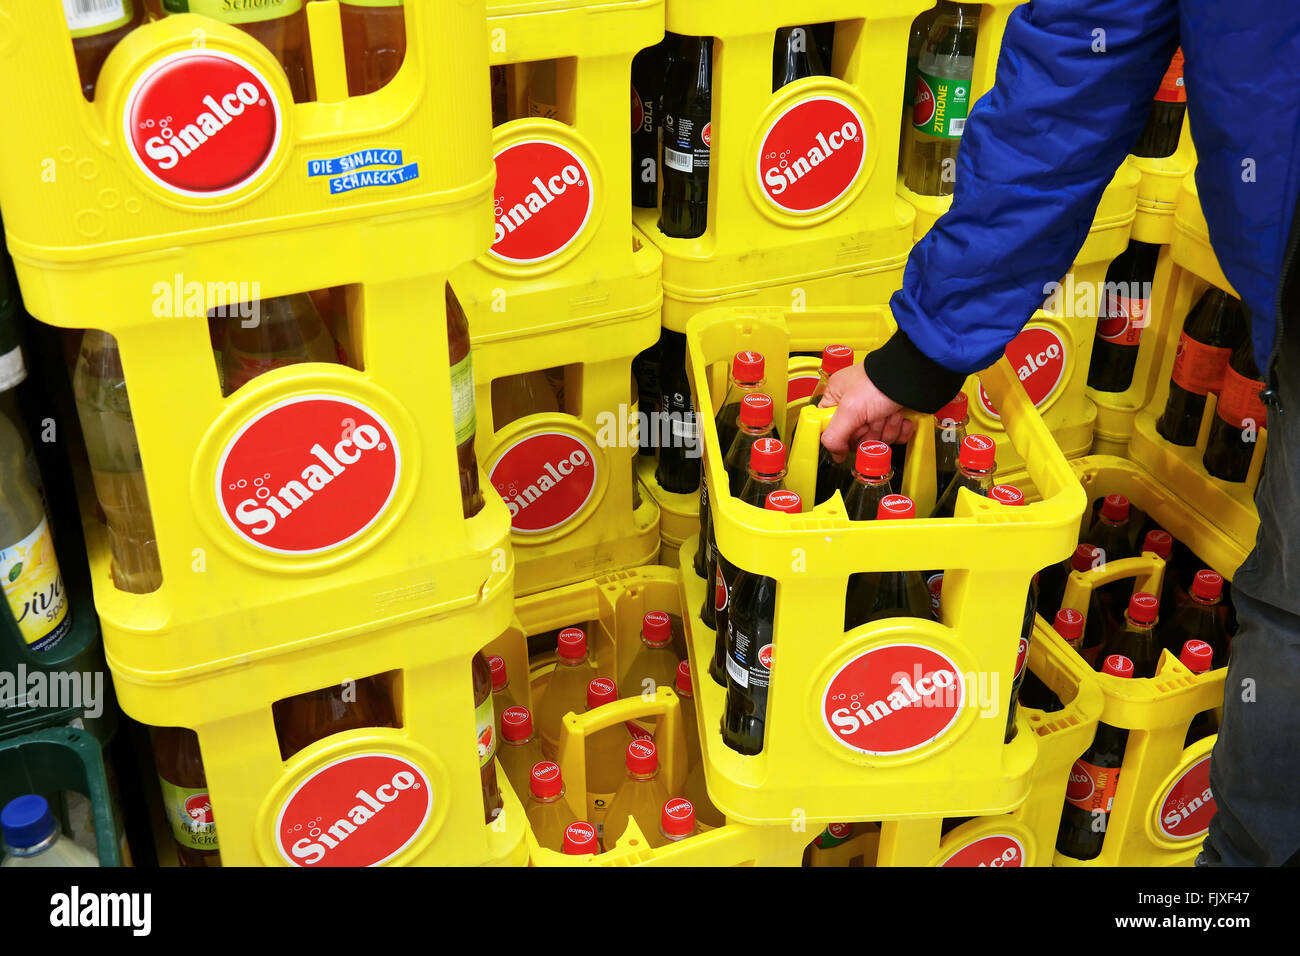 Sinalco is a popular brand of non-alcoholic drinks Stock Photo